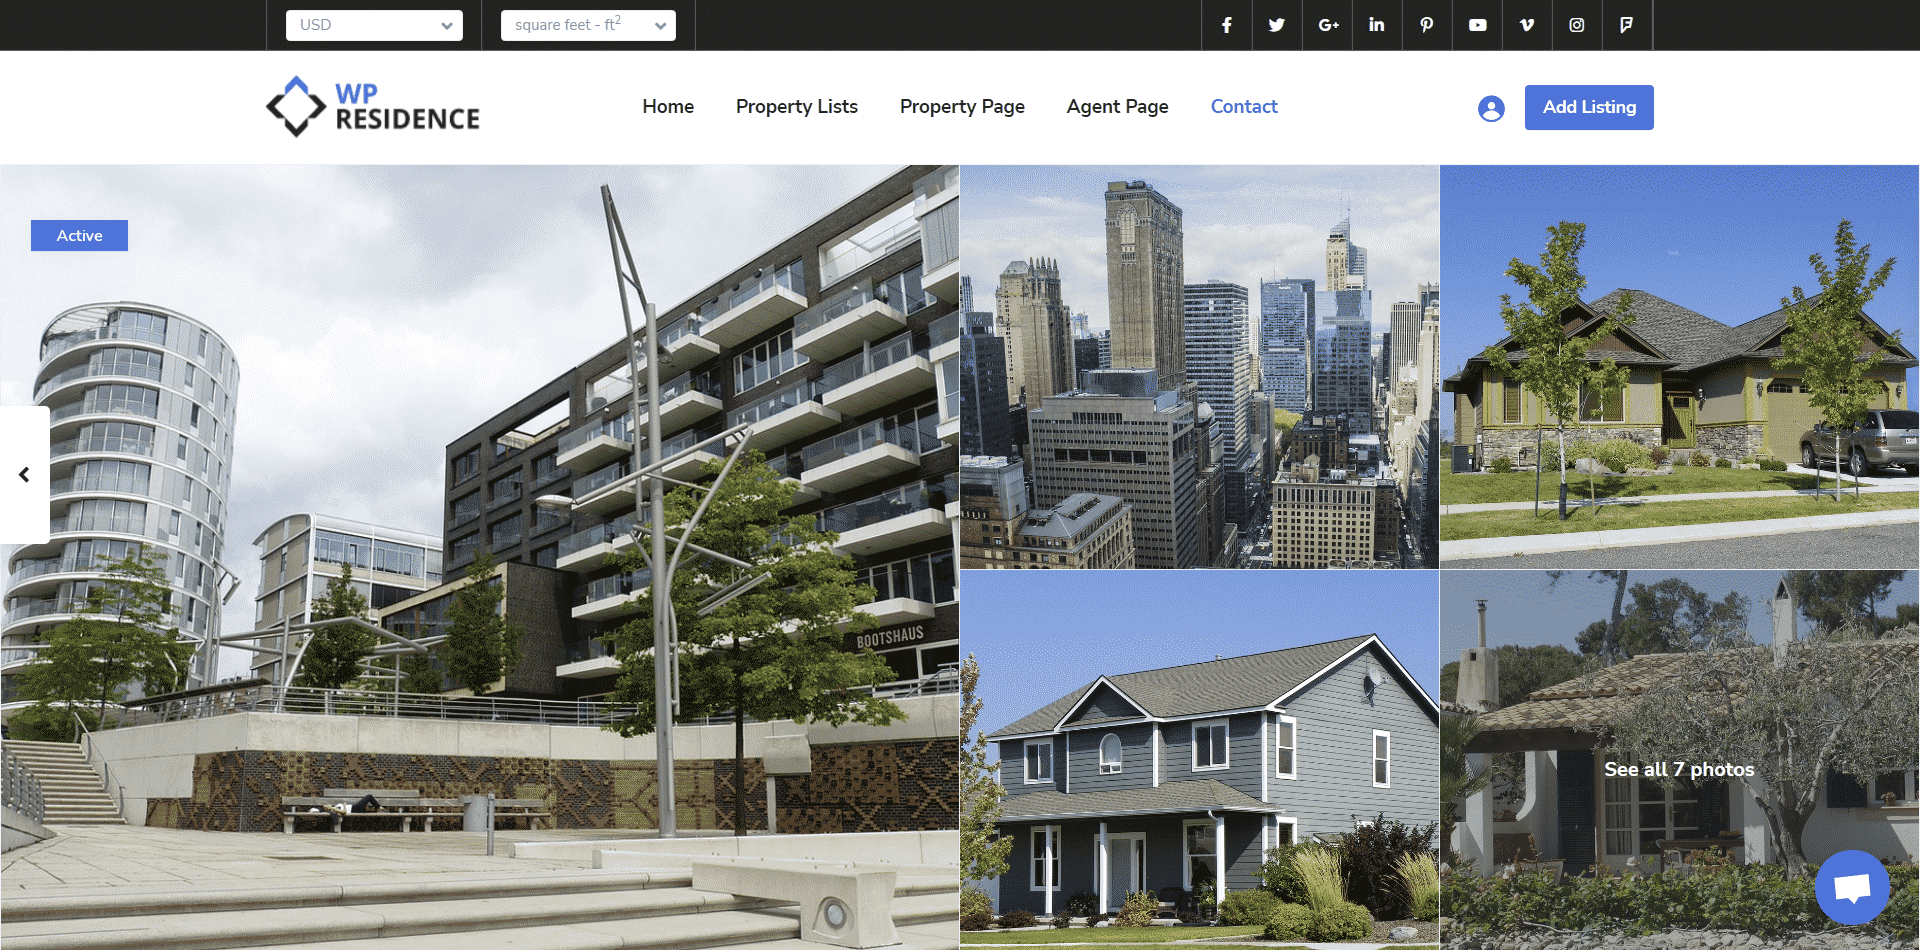 WPResidence theme with featured images of properties in a grid layout.